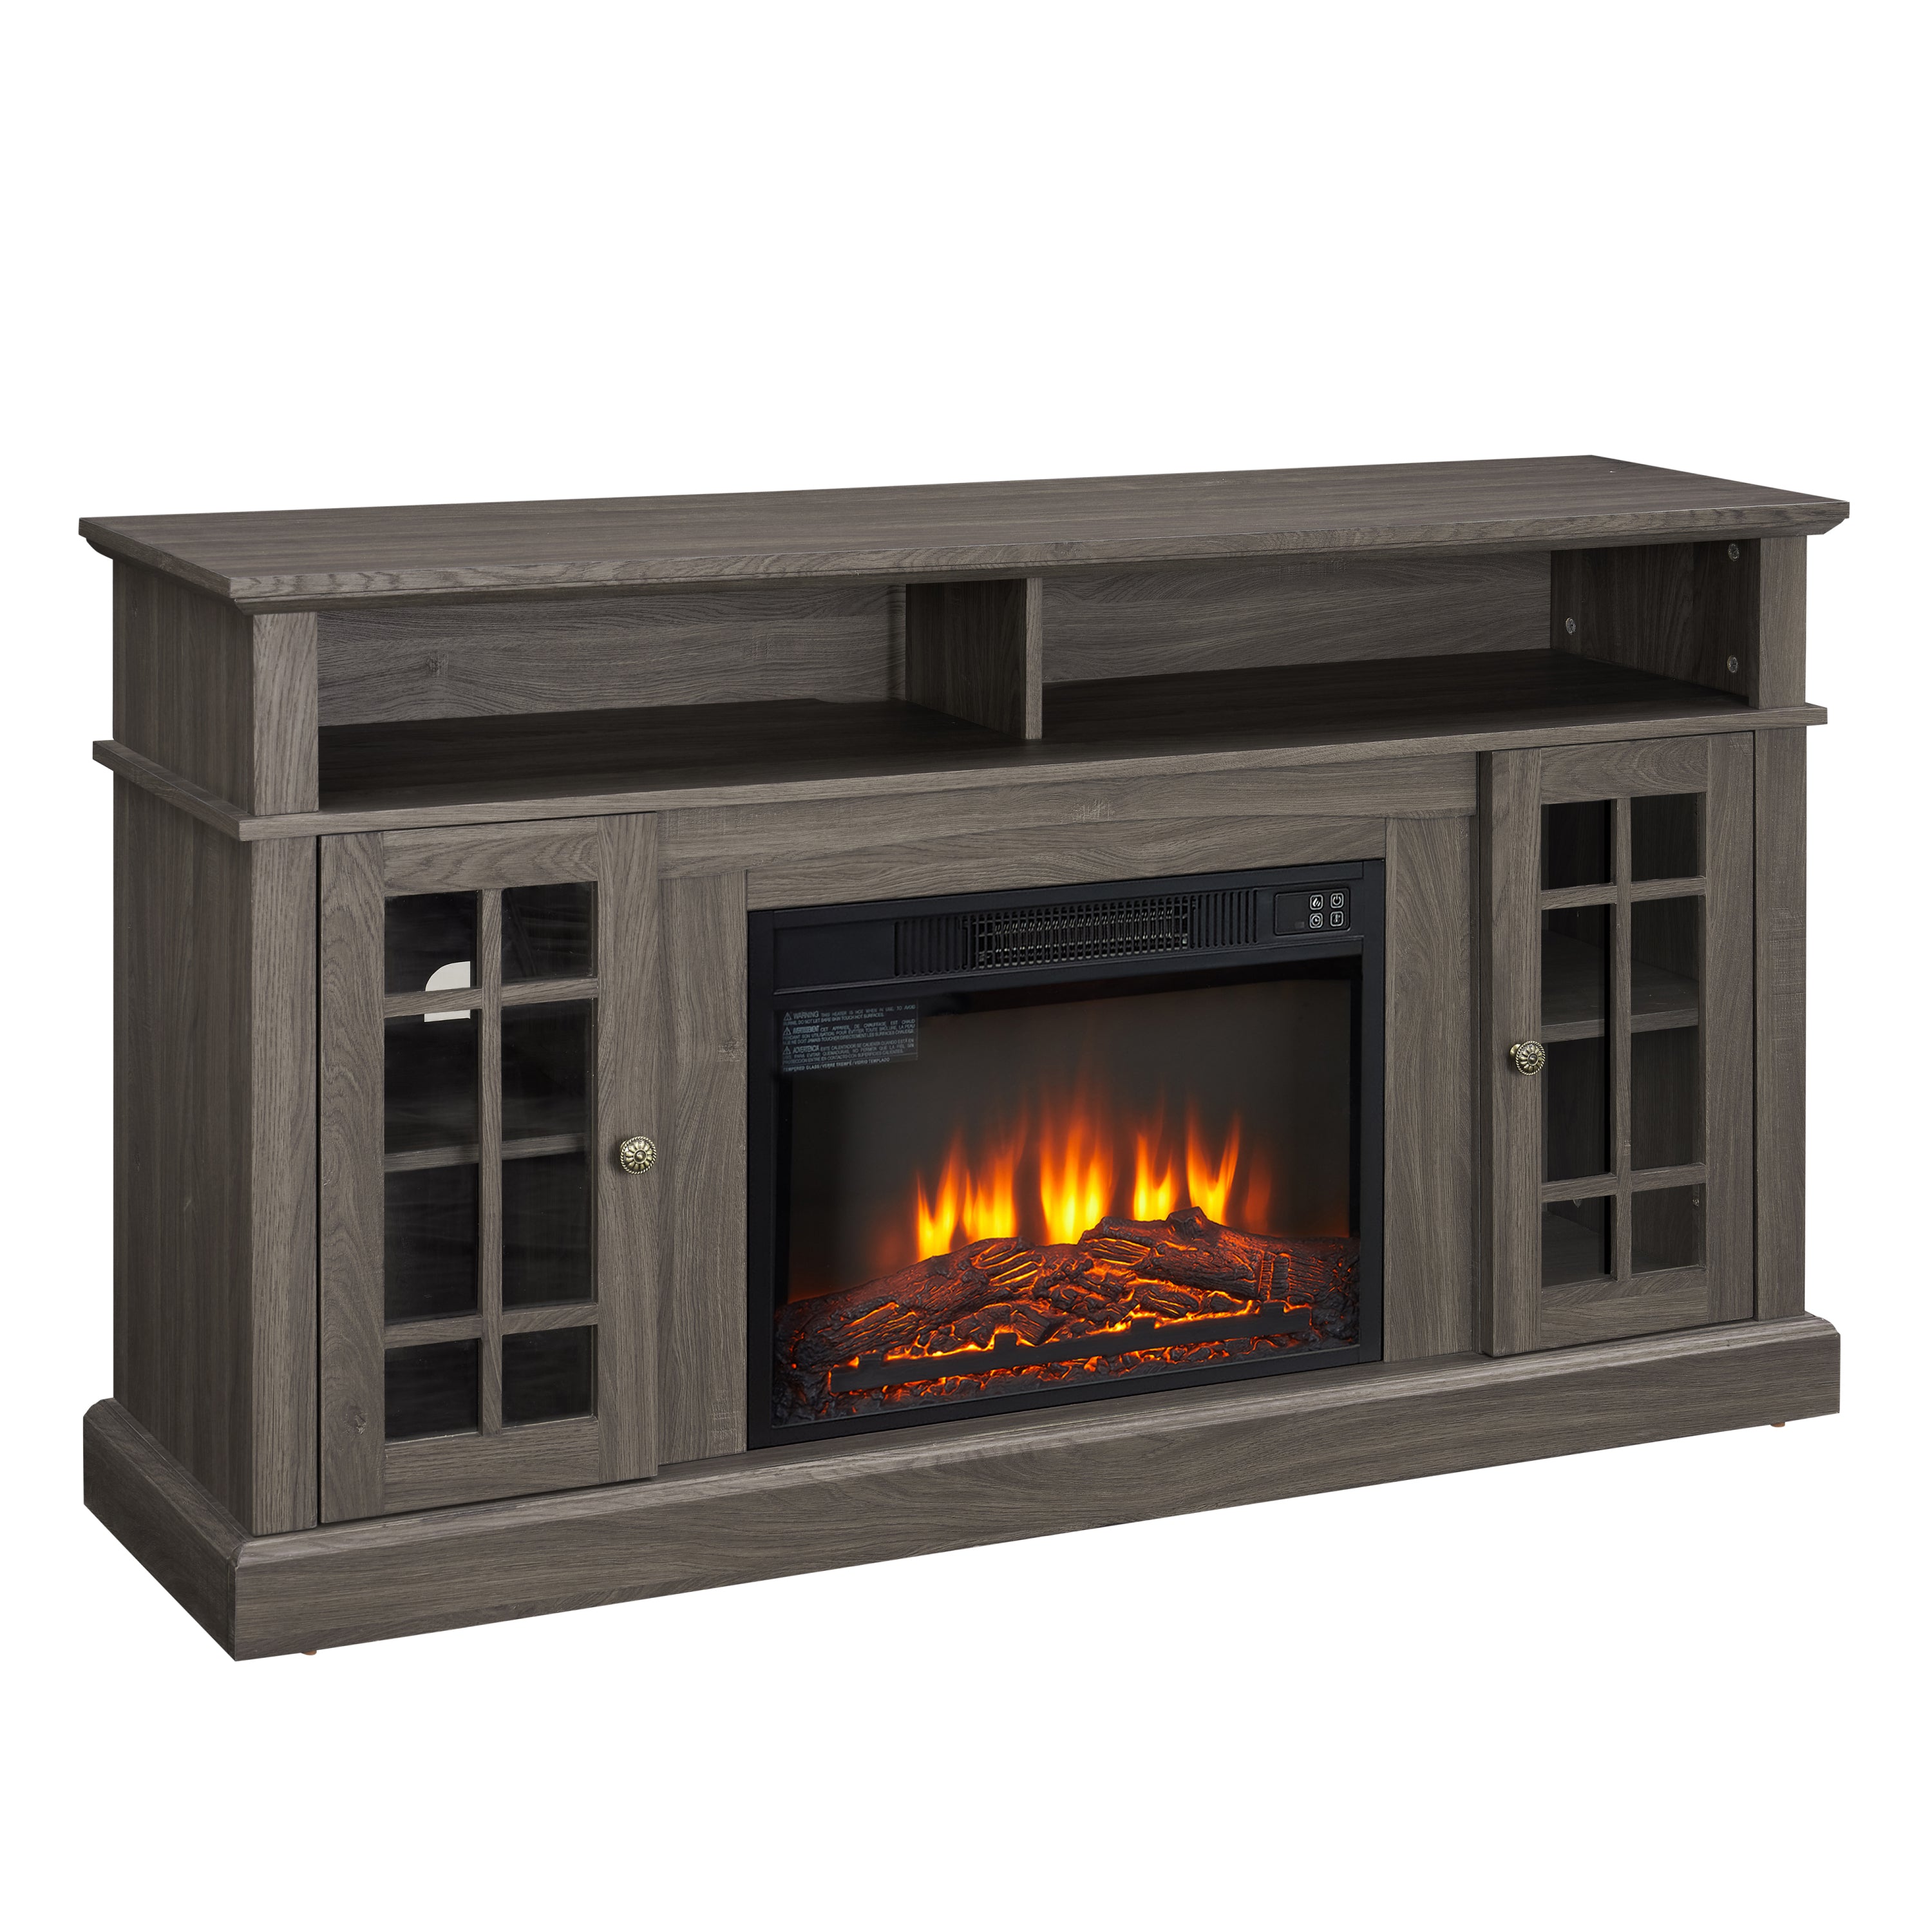 Modern TV Media Stand With Insert Fireplace